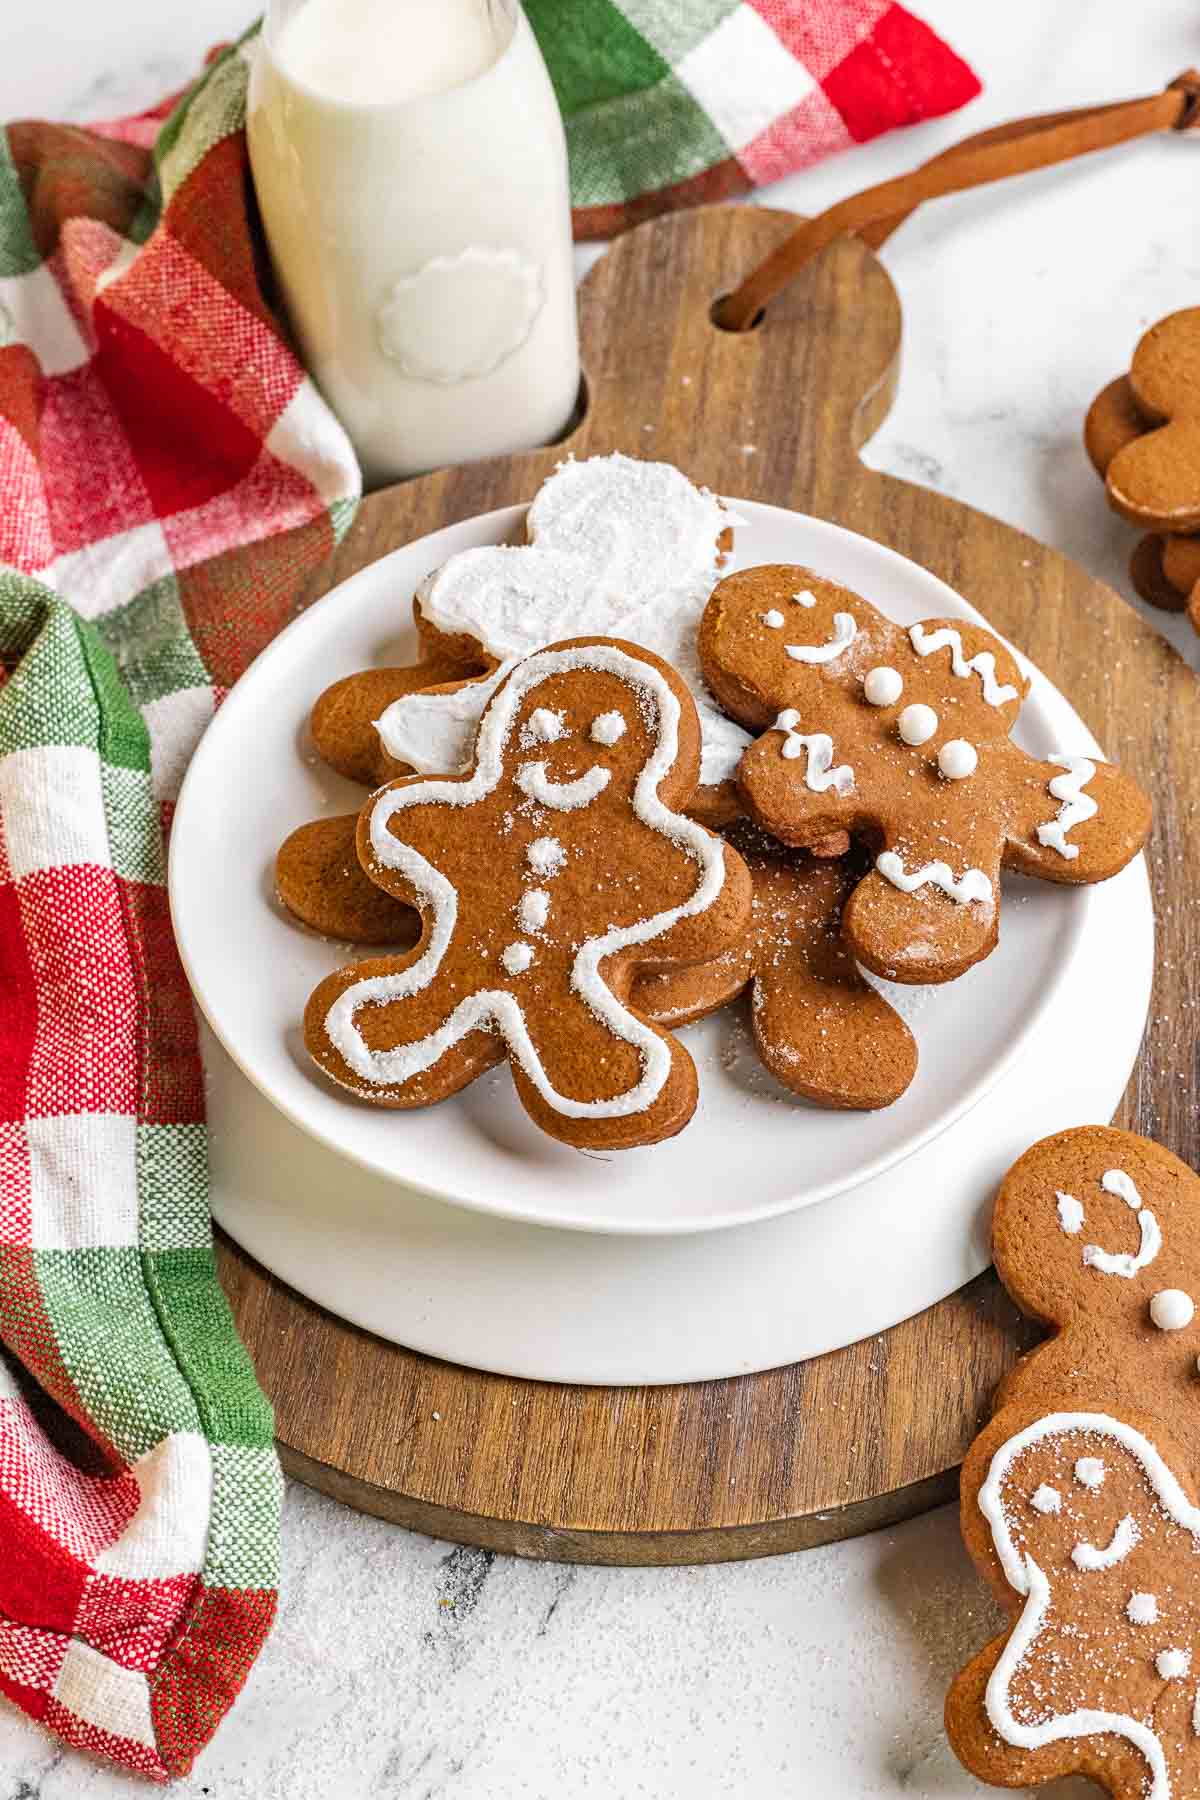 Chocolate Gingerbread Men on serving plate